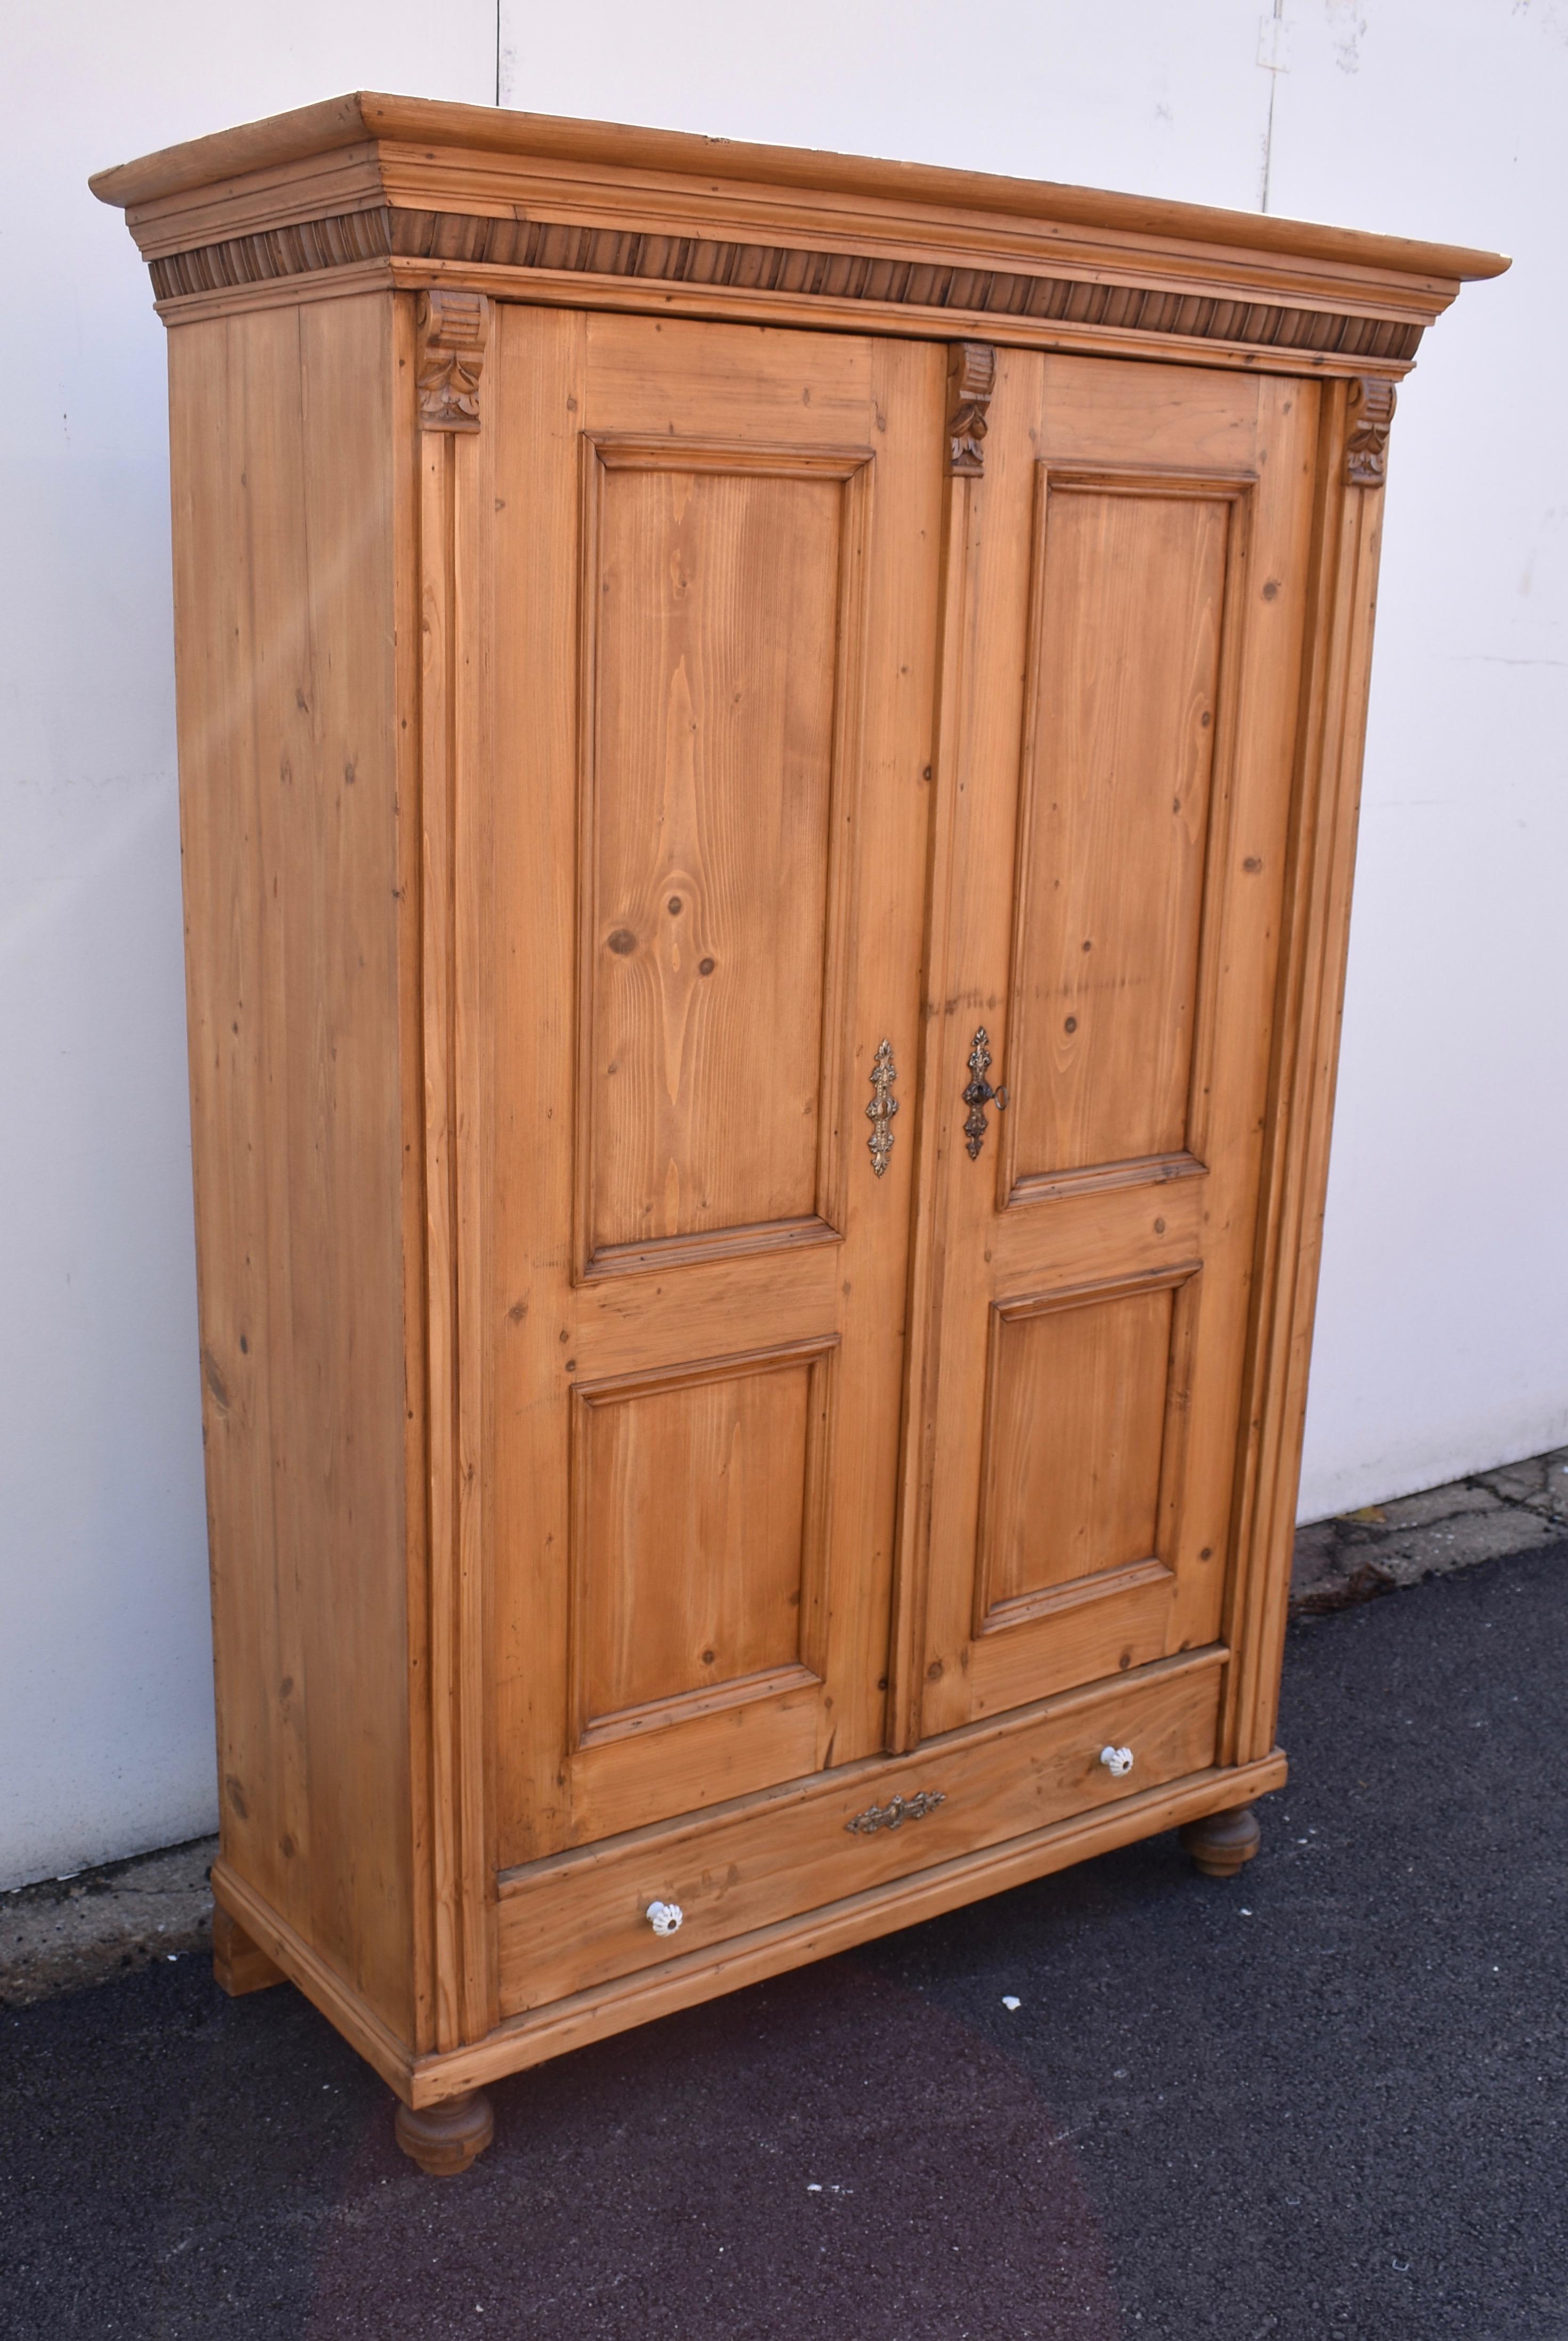 This pretty little armoire has many of the features that make antique Hungarian pine furniture so attractive. The beautiful crown is built of five tiers of molding. Including a row of hardwood gadrooning. The front corners border the doors with